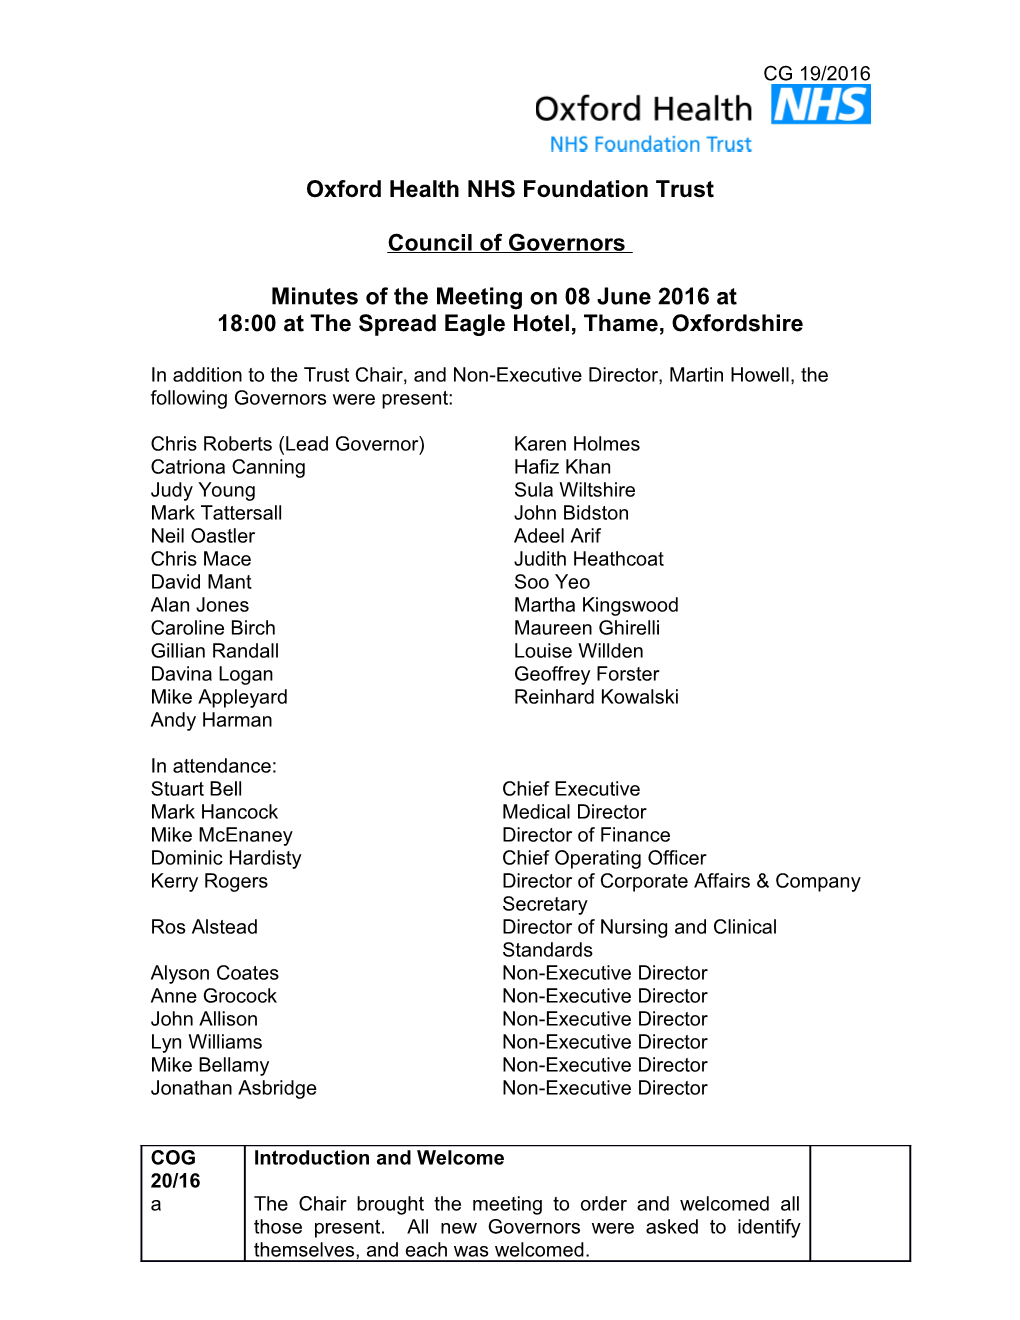 Oxford Health NHS Foundation Trust s2